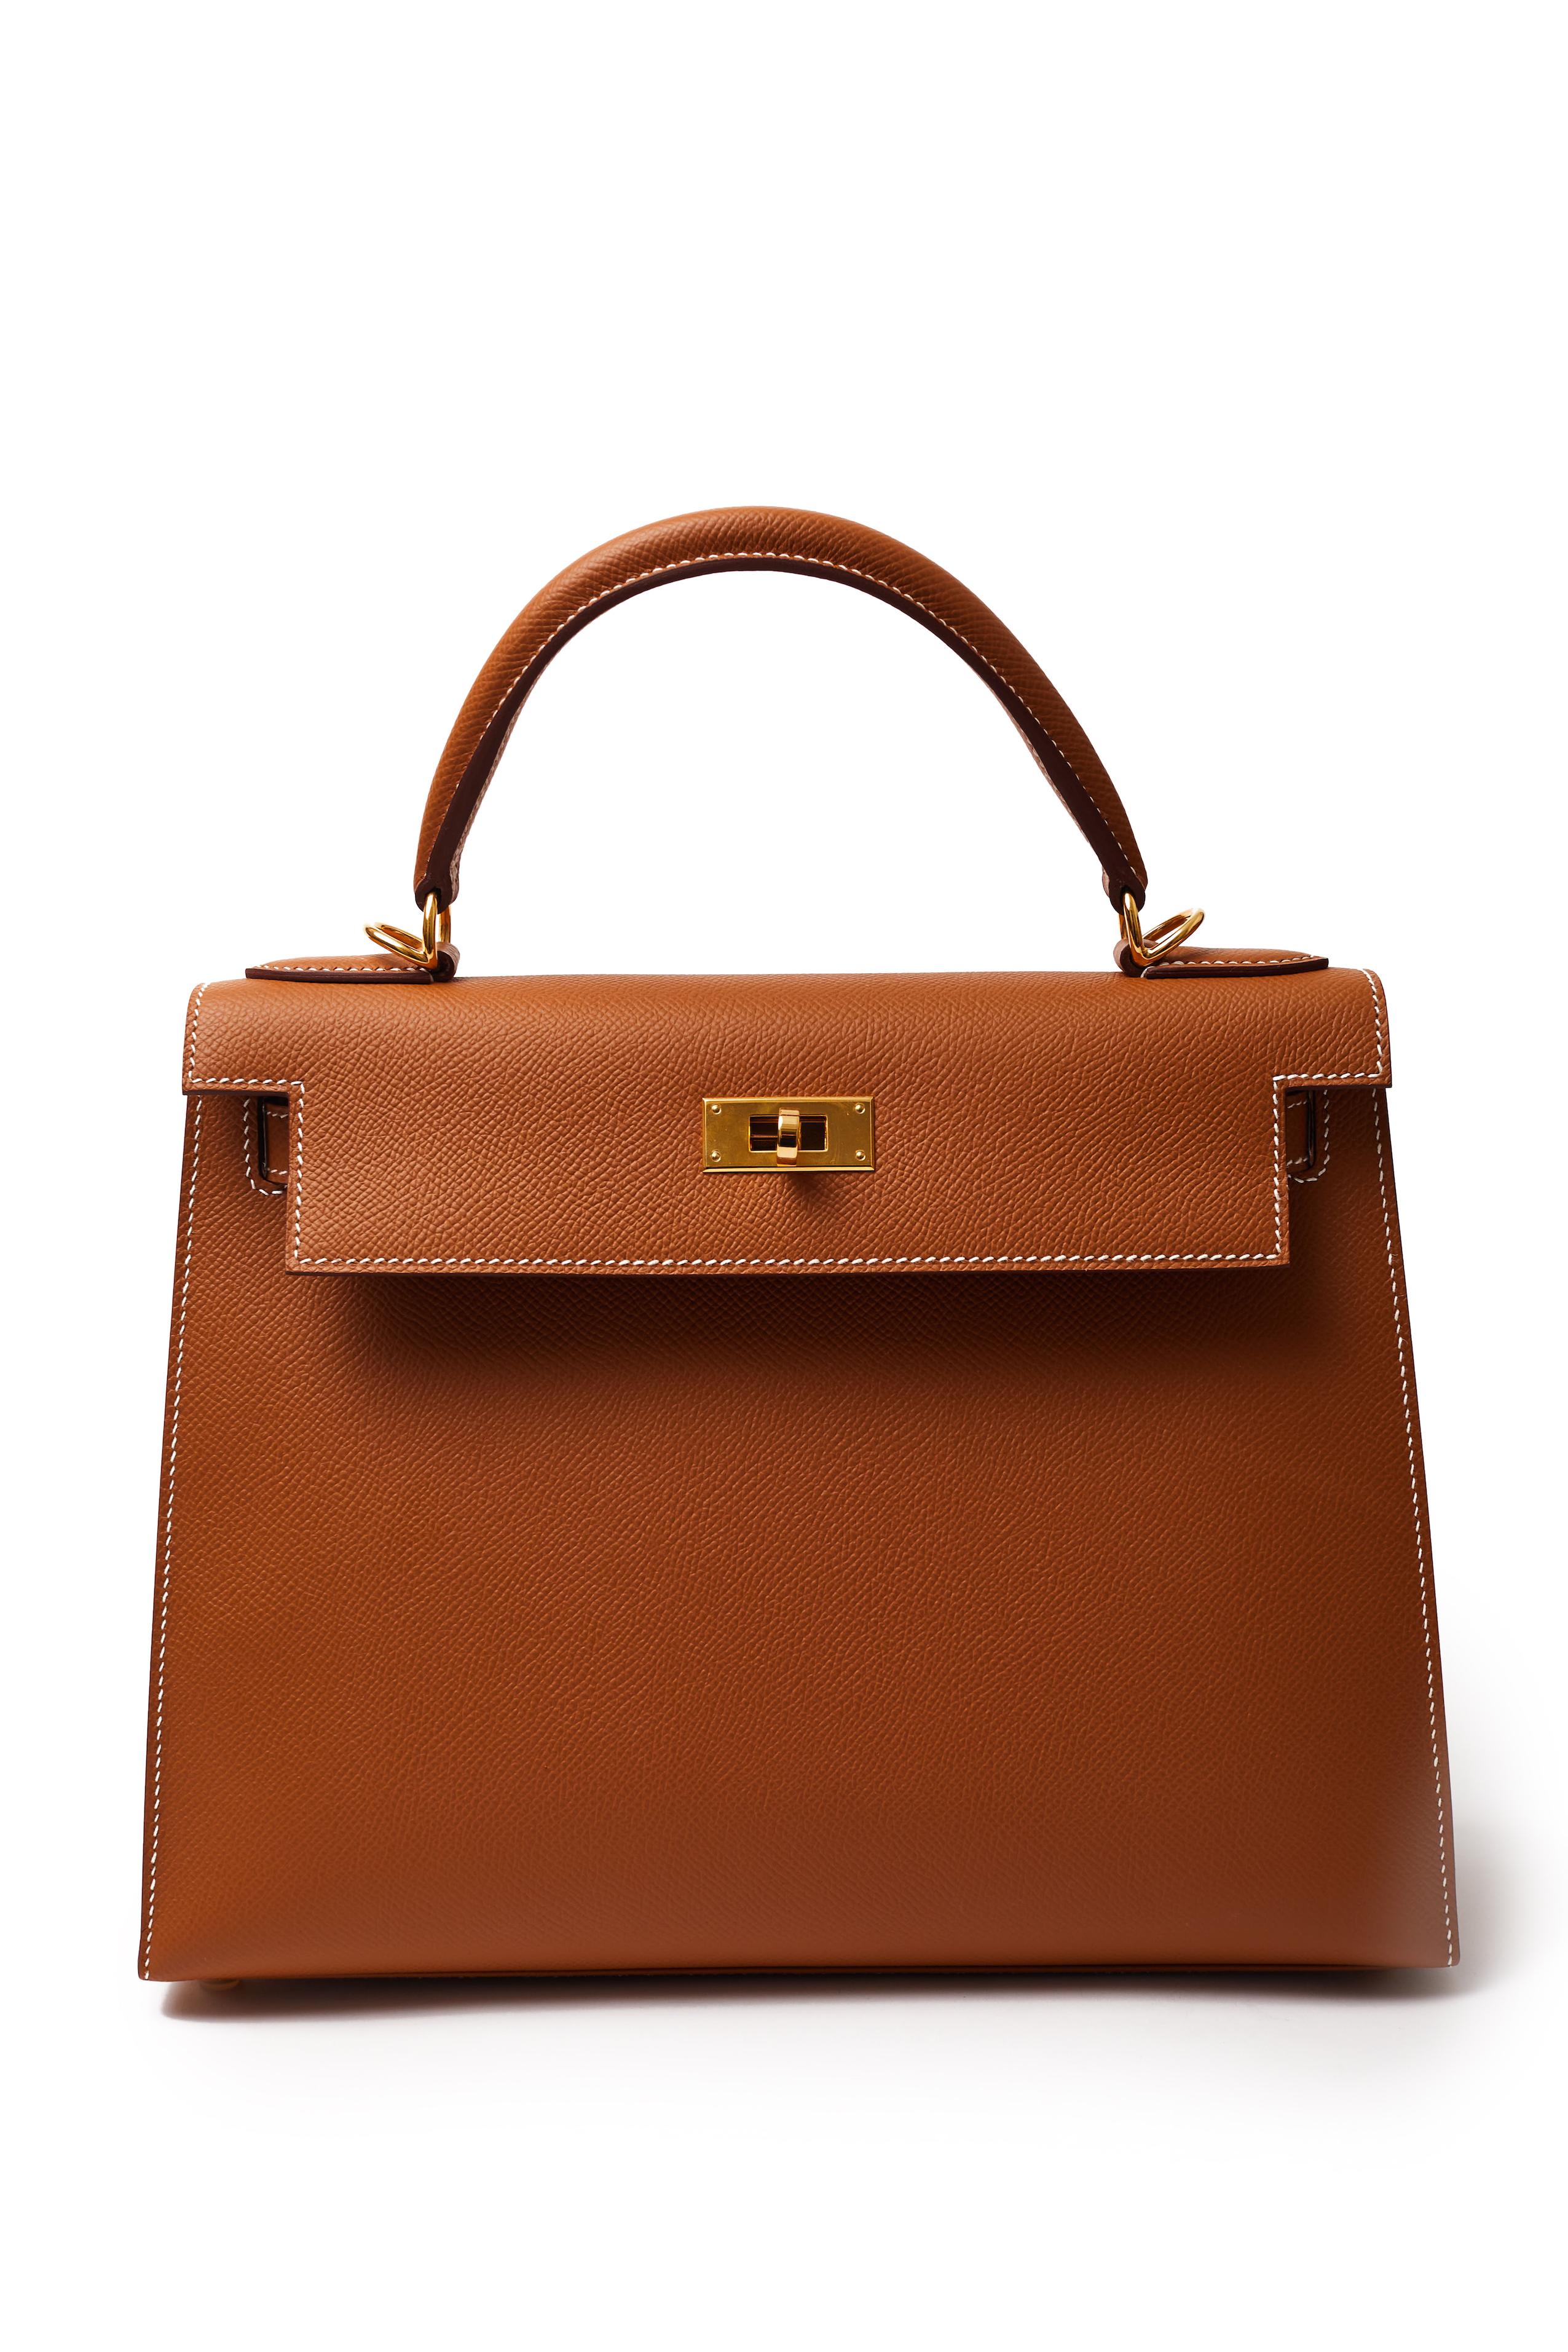 The grand dame of Hermès bags, this Kelly 28 in Gold Veau Epsom leather is in immaculate, unused condition. Featuring gold hardware, this is the perfect neutral shade in a versatile size that works for day or evening. Comes with original box,